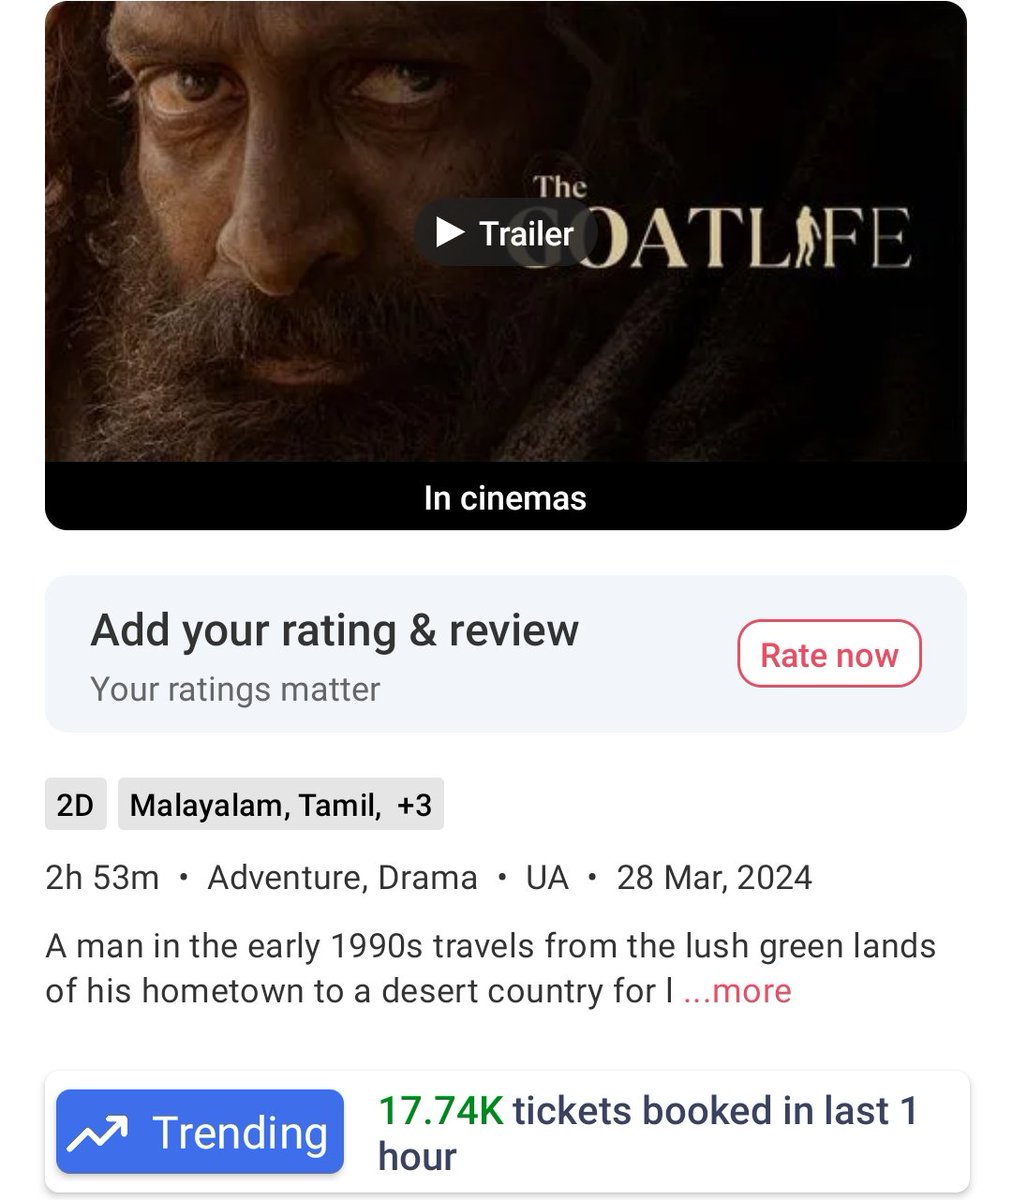 Last 1 hour approx 18K tickets sold via @bookmyshow 🔥🔥🔥🥵🥵🥵 ROGER THAT. #TheGoatLife #Aadujeevitham